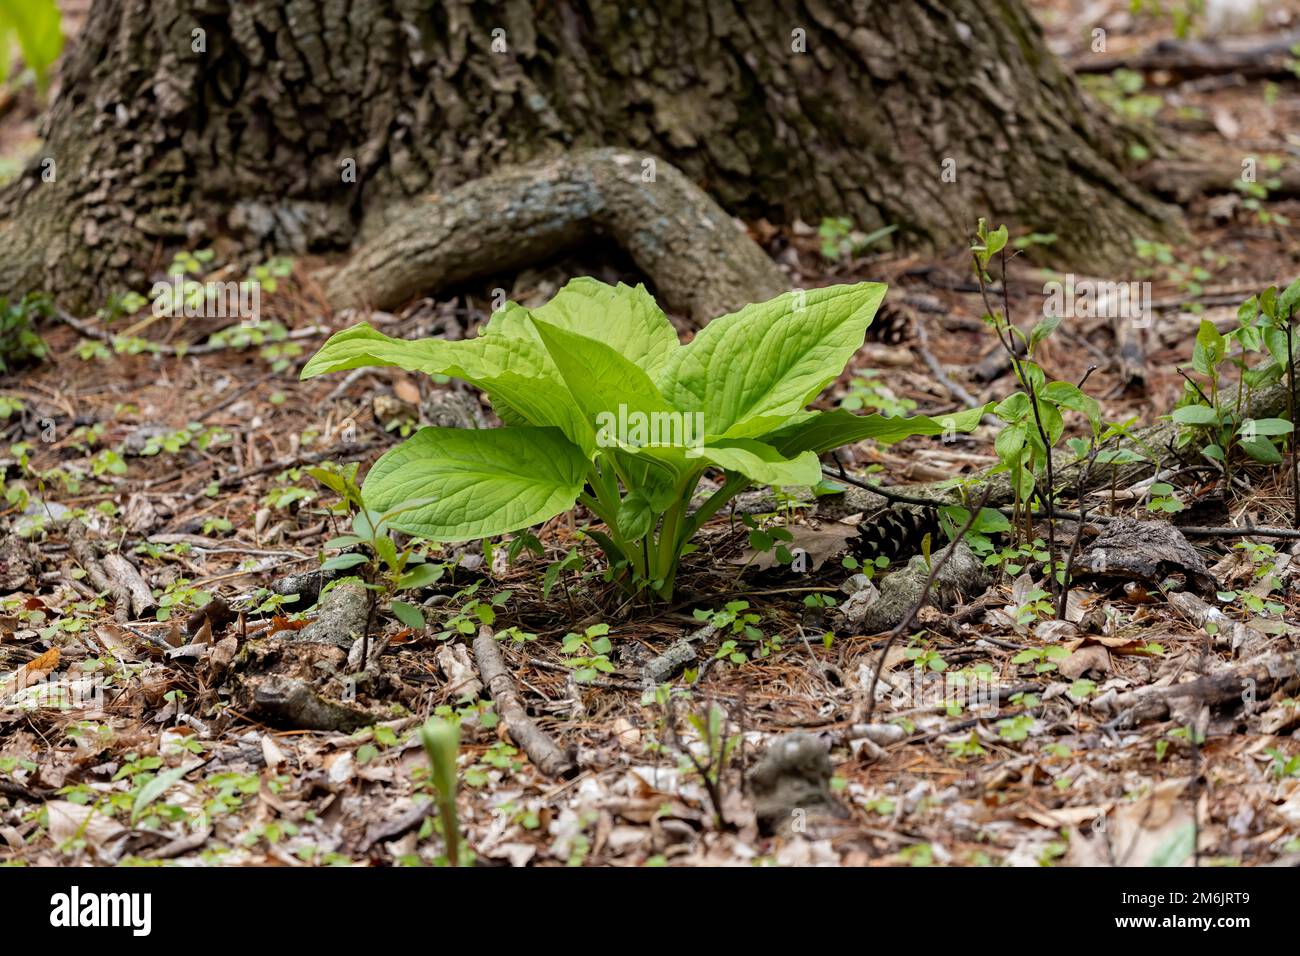 Skunk cabbage. Growing green leaves of the first spring plants in Wisconsin. Stock Photo